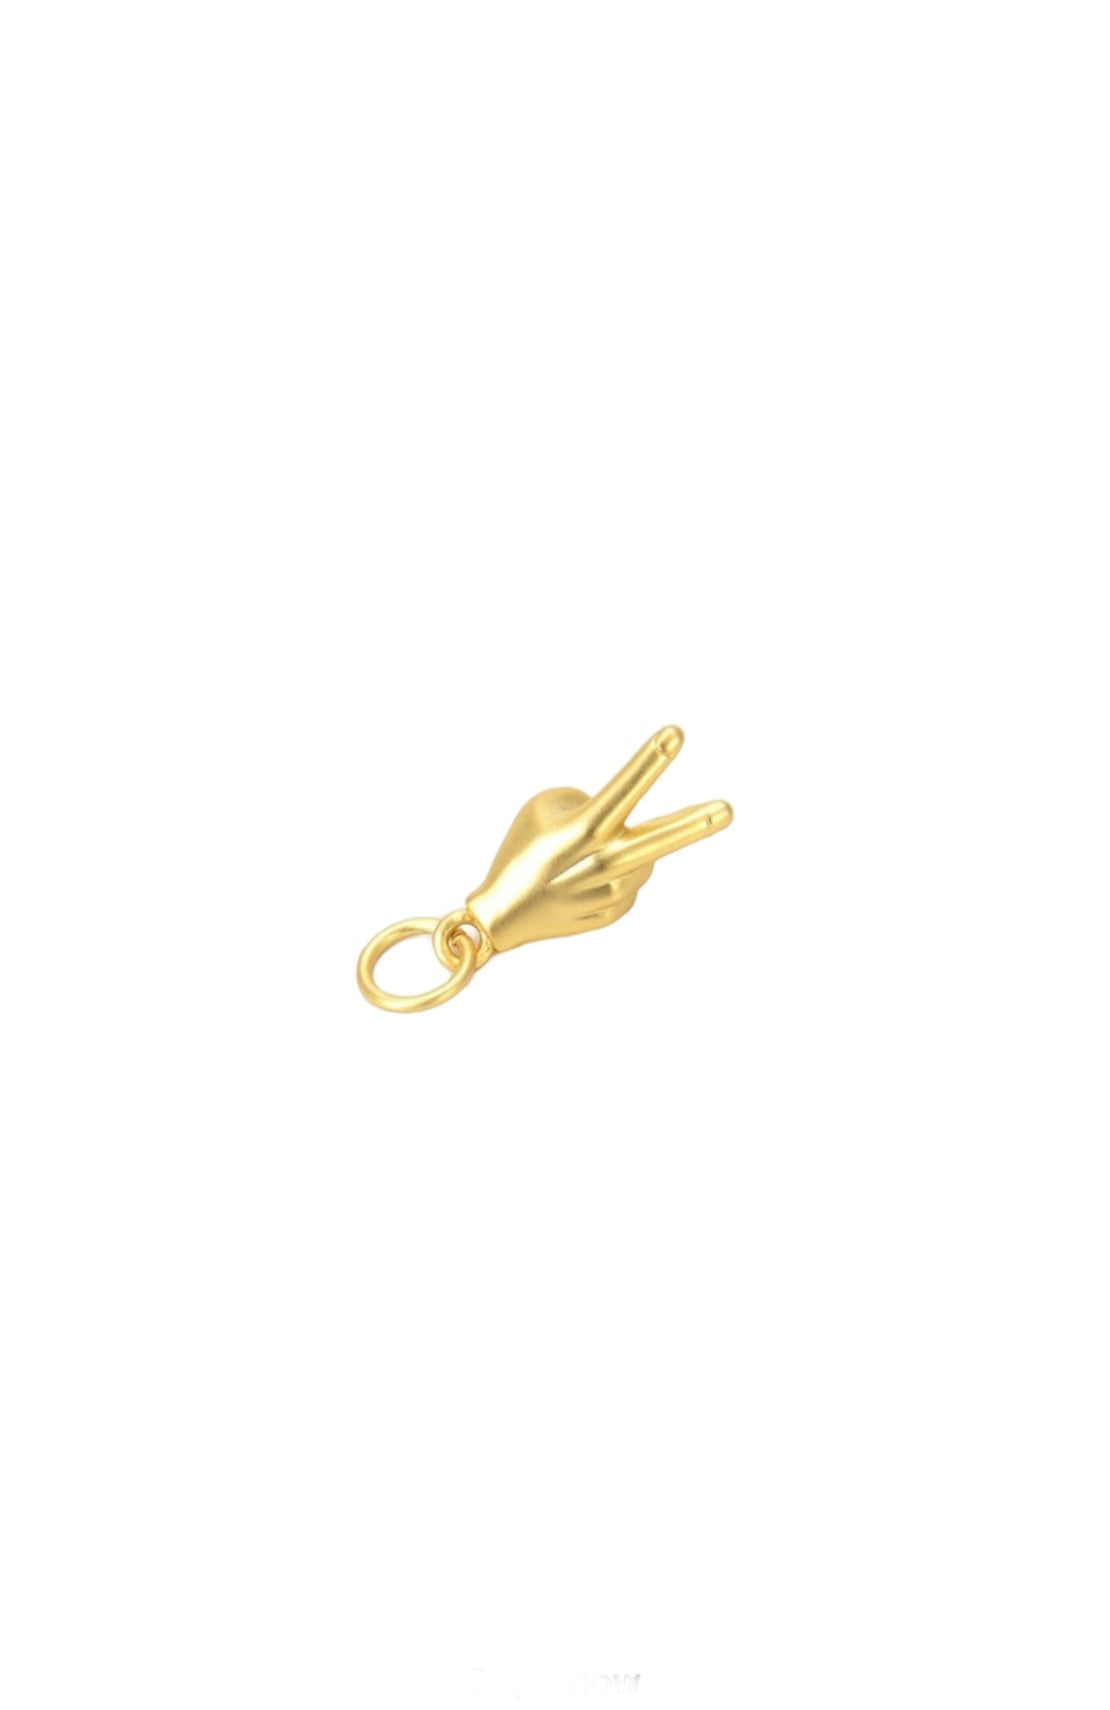 Gold Peace Sign Charm